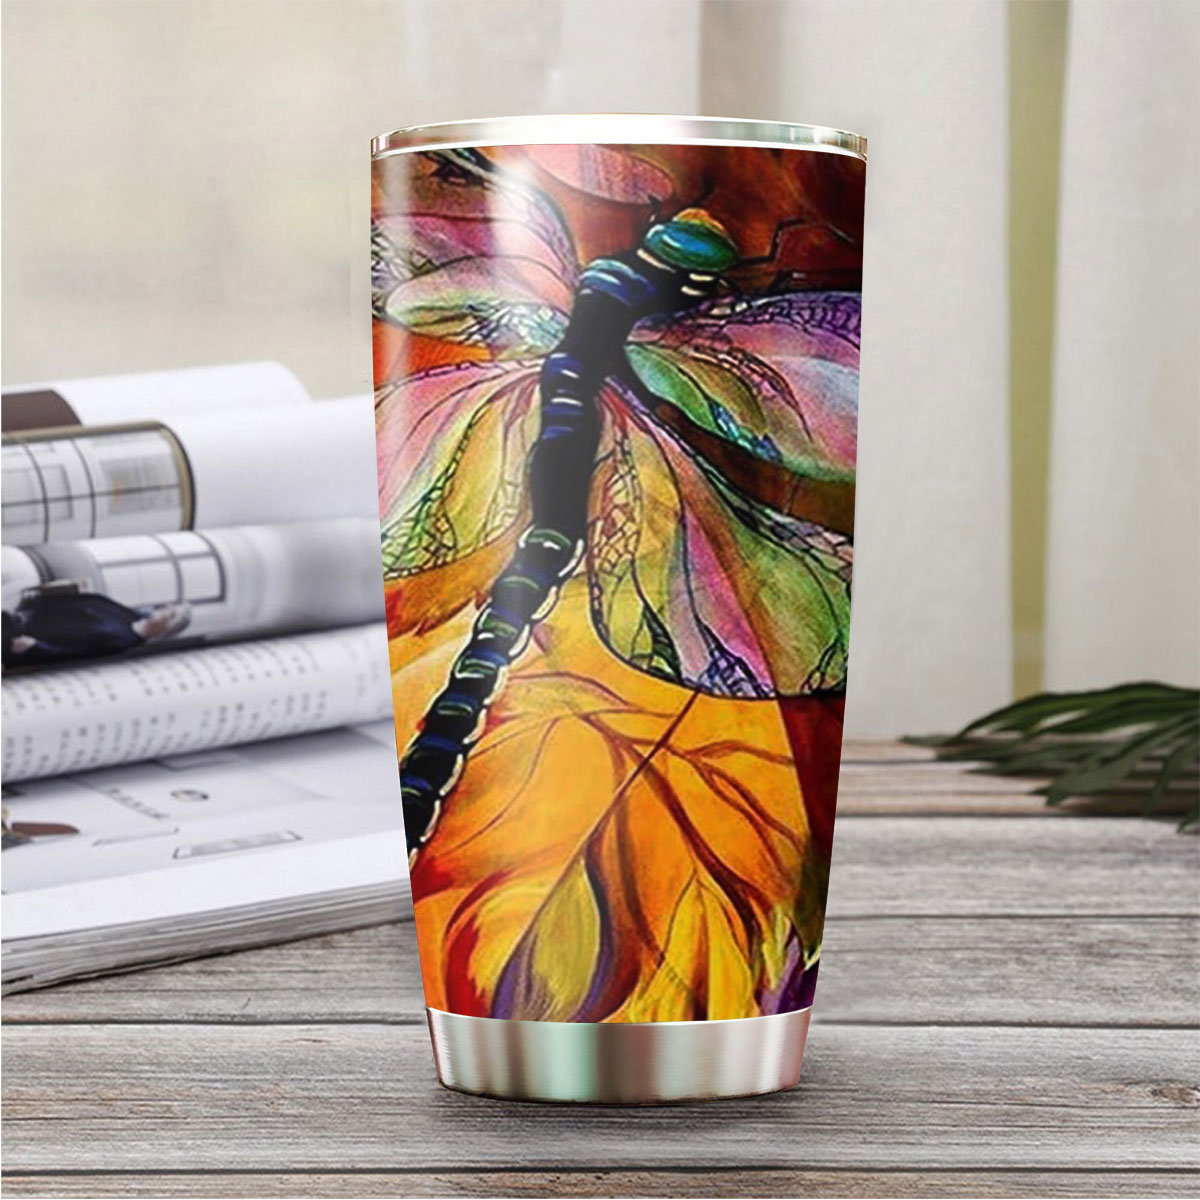 The Sunset Dragonfly Tumbler